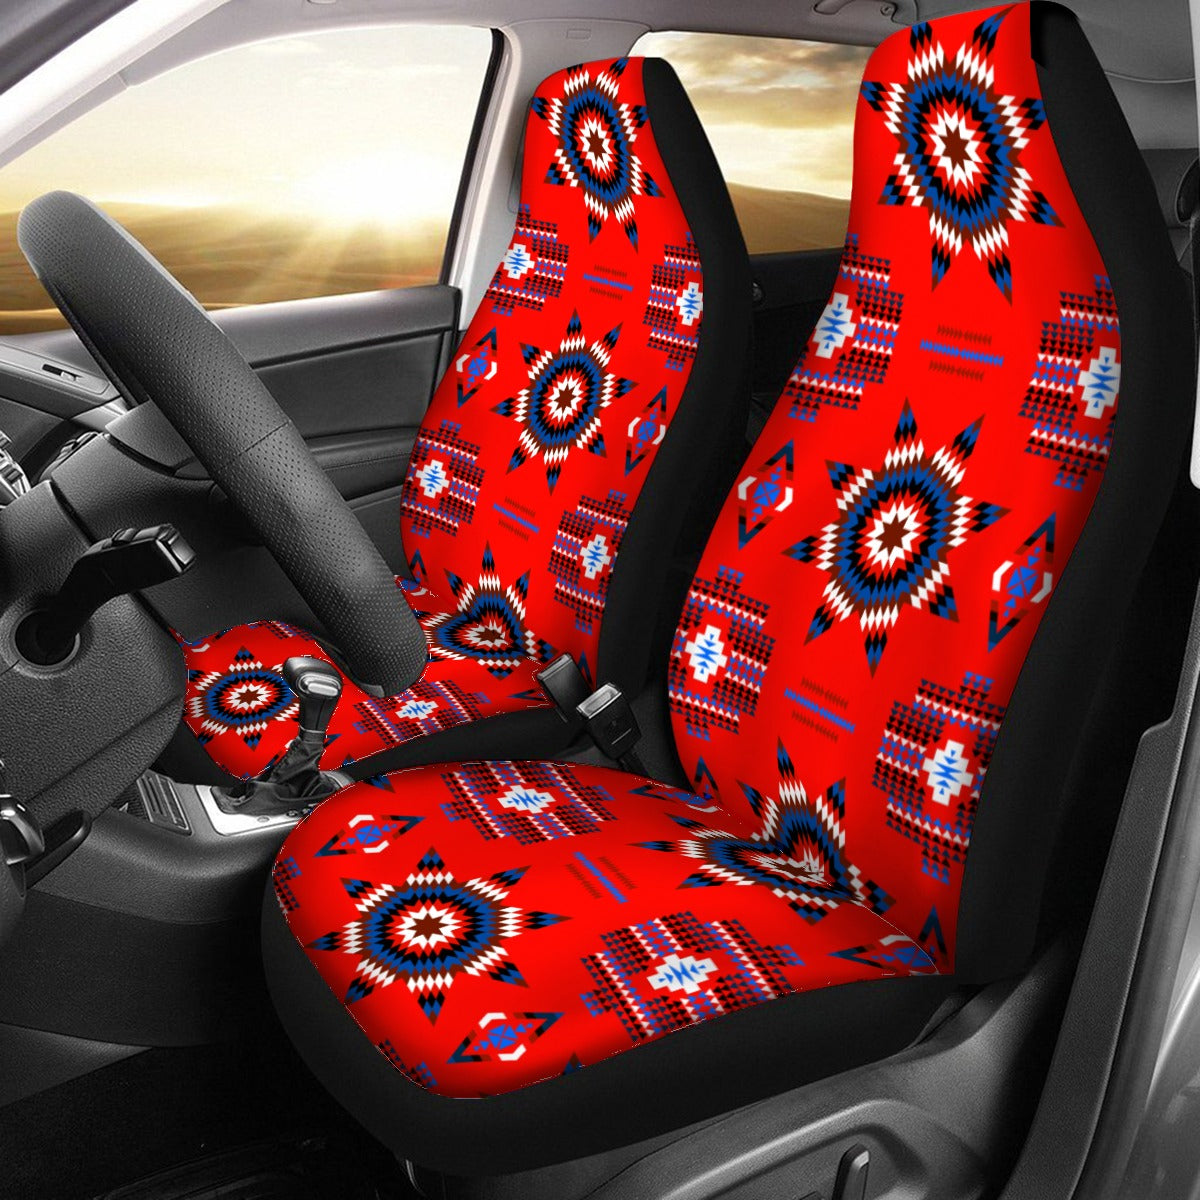 Rising Star Blood Moon Universal Car Seat Cover With Thickened Back